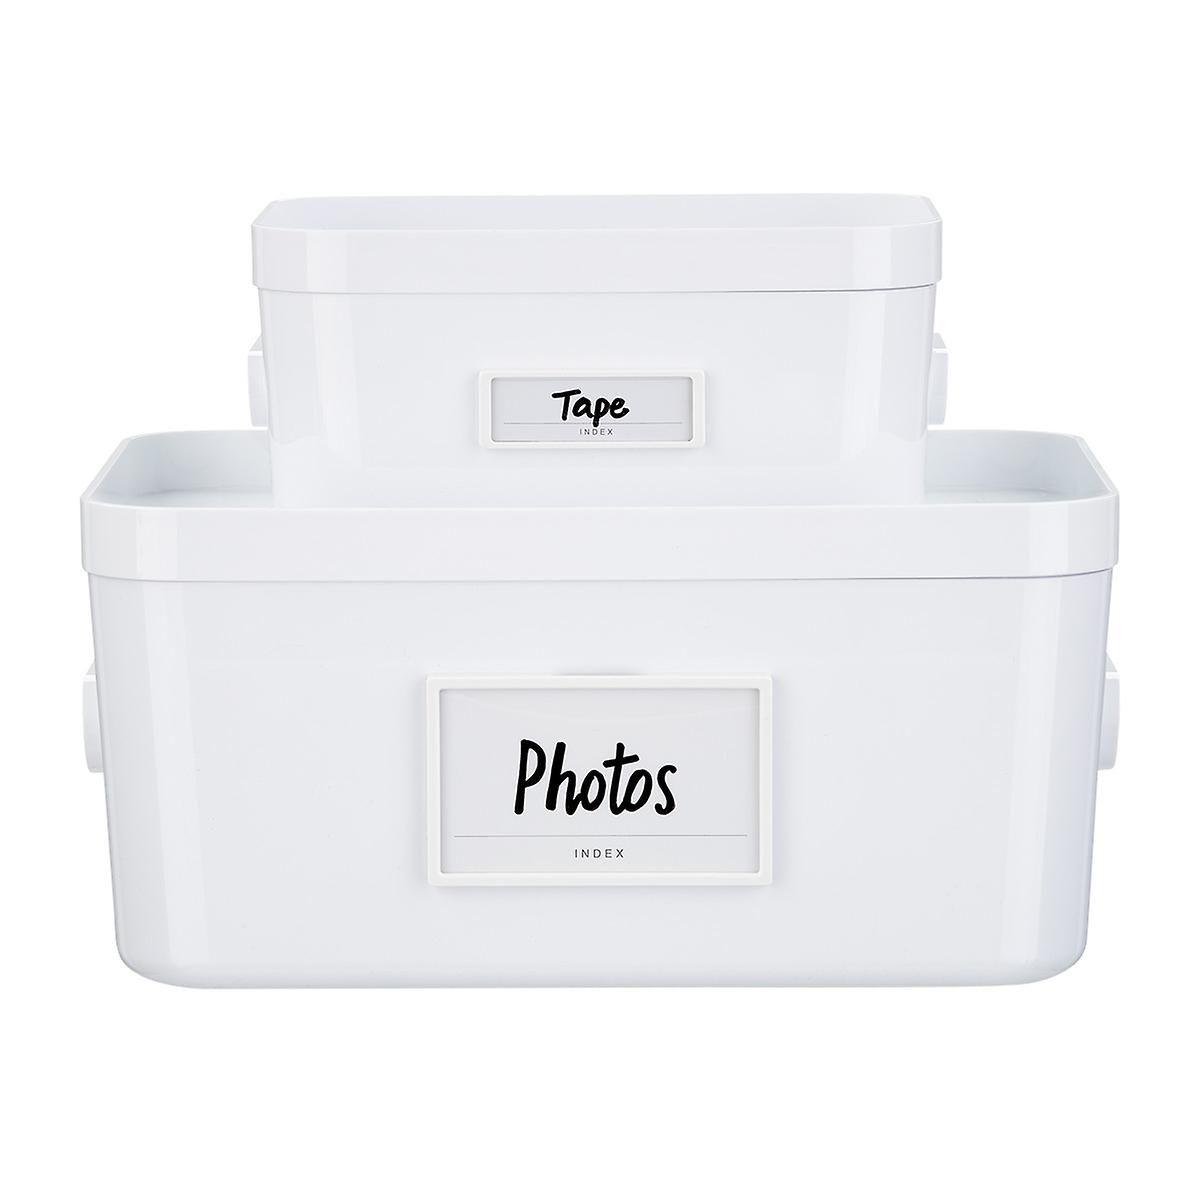 Like-it White Label Holders | The Container Store